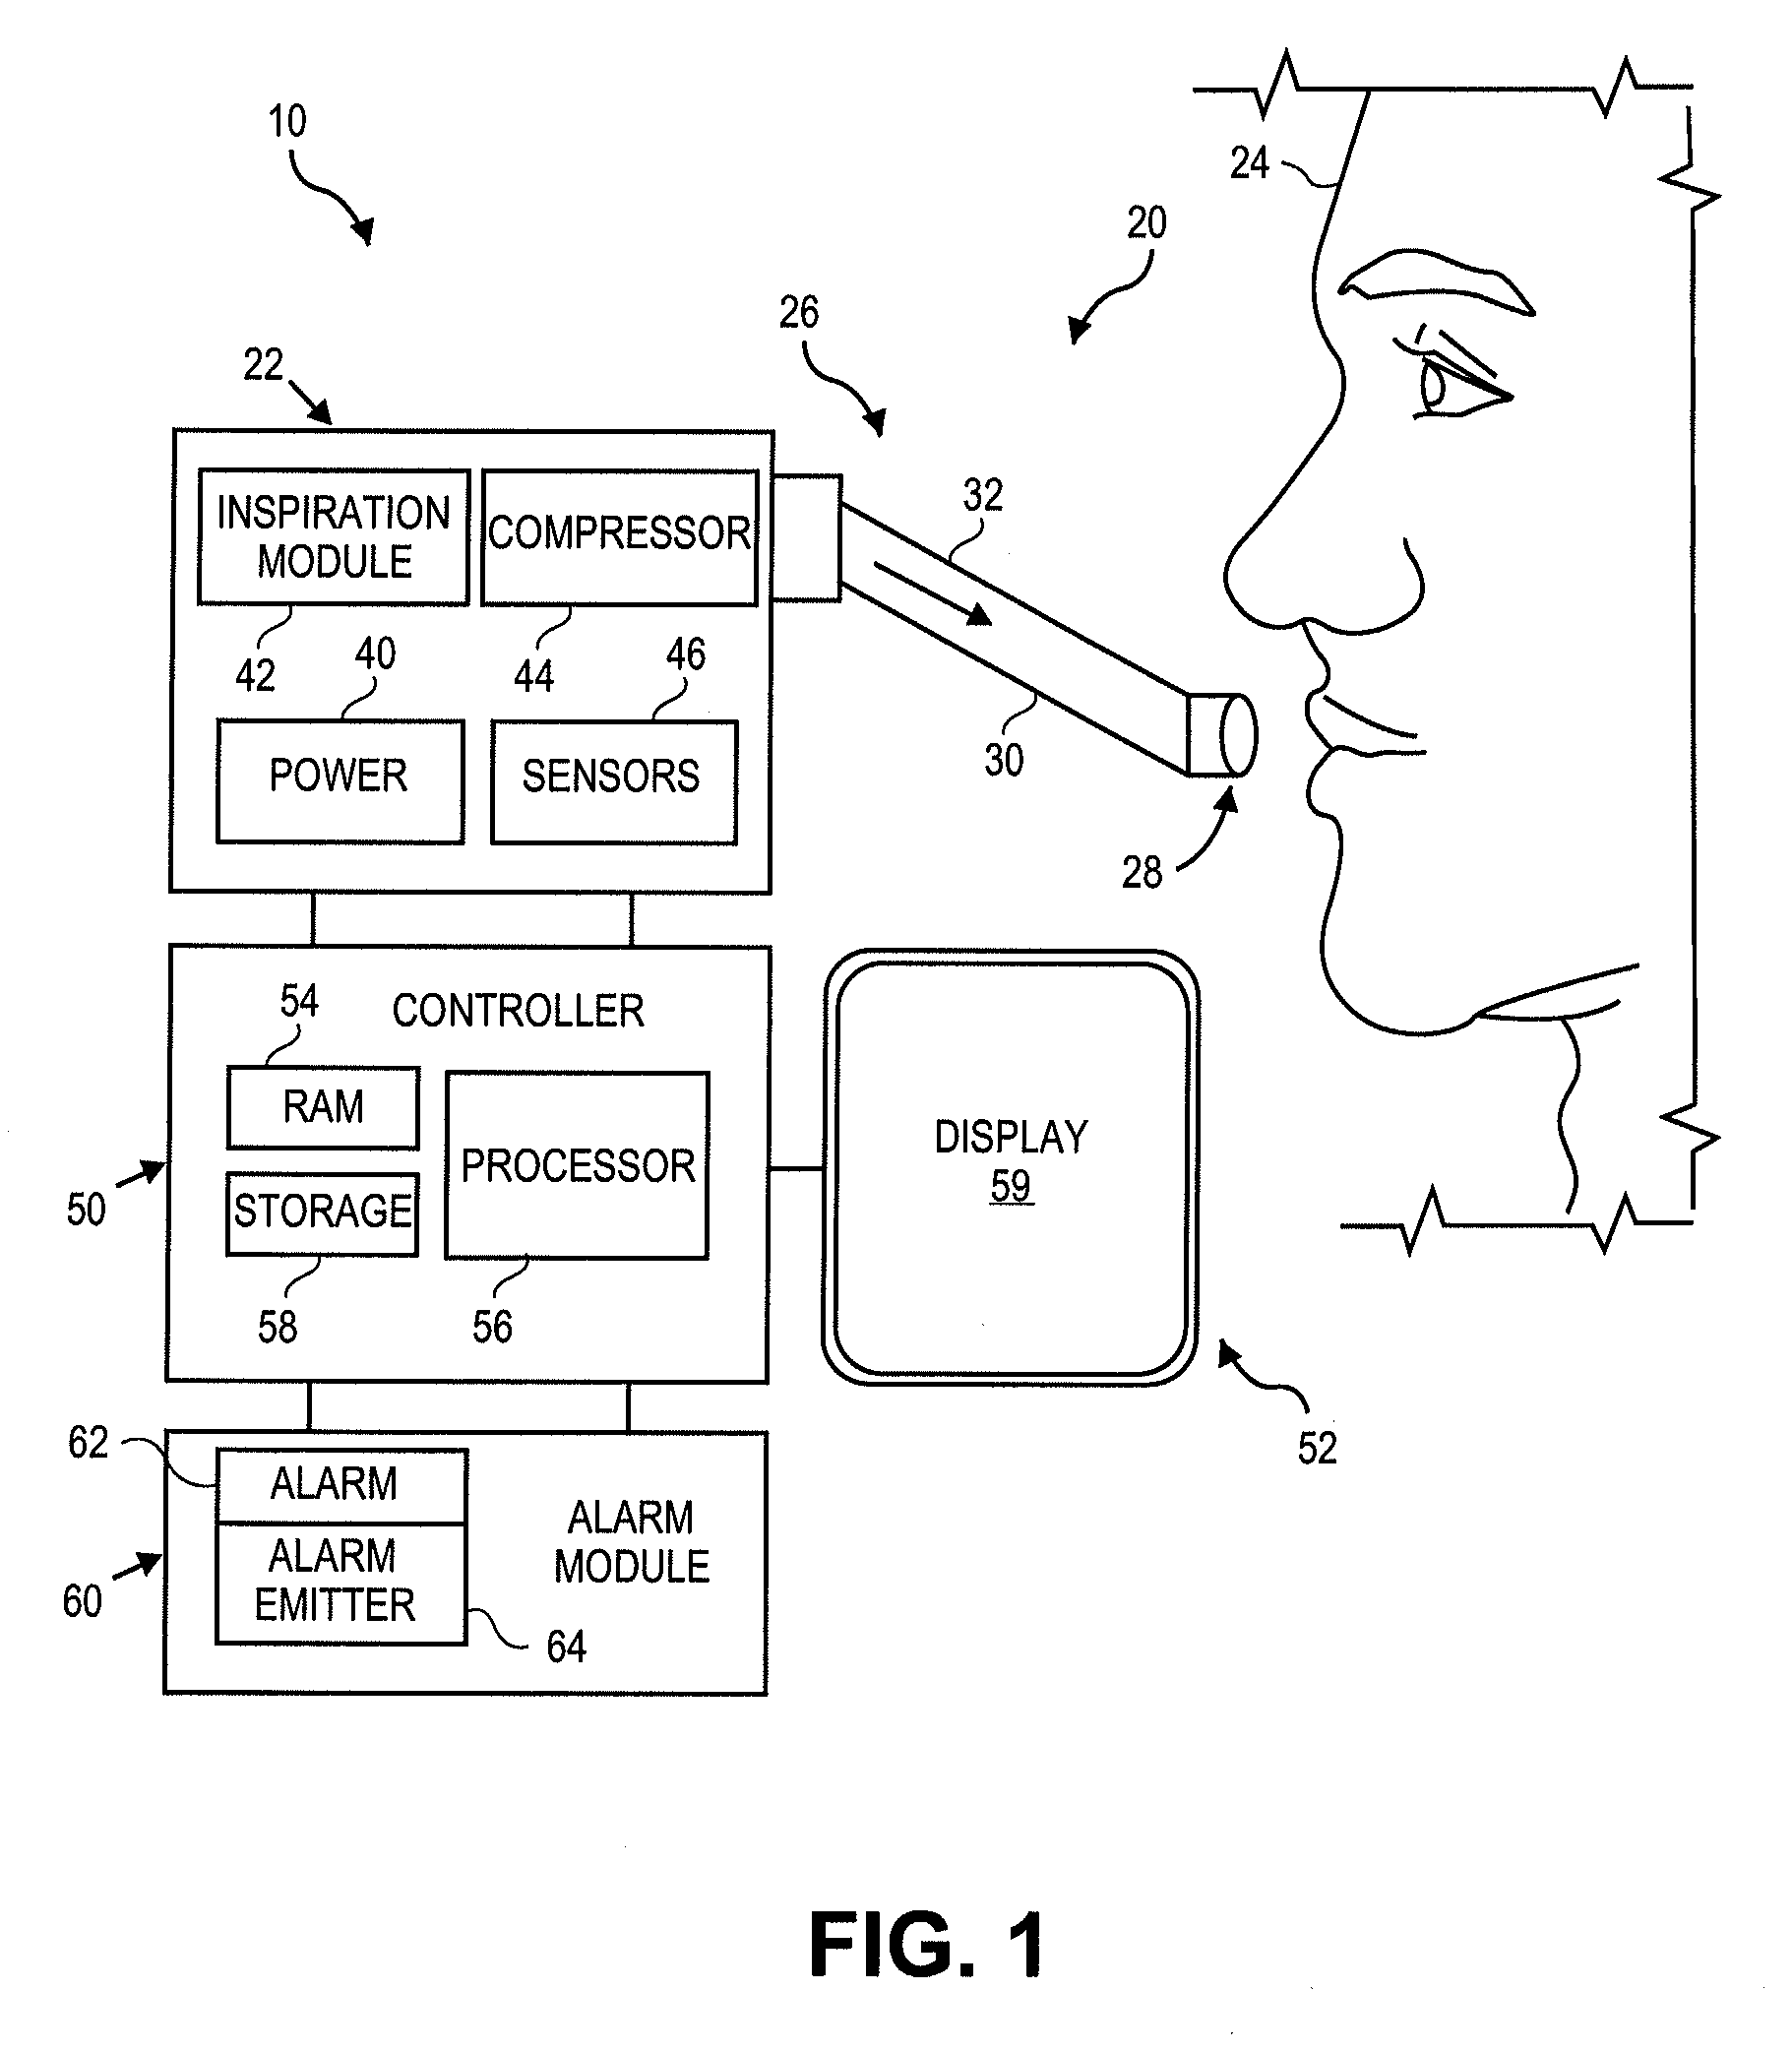 Systems and methods for providing ventilation based on patient need